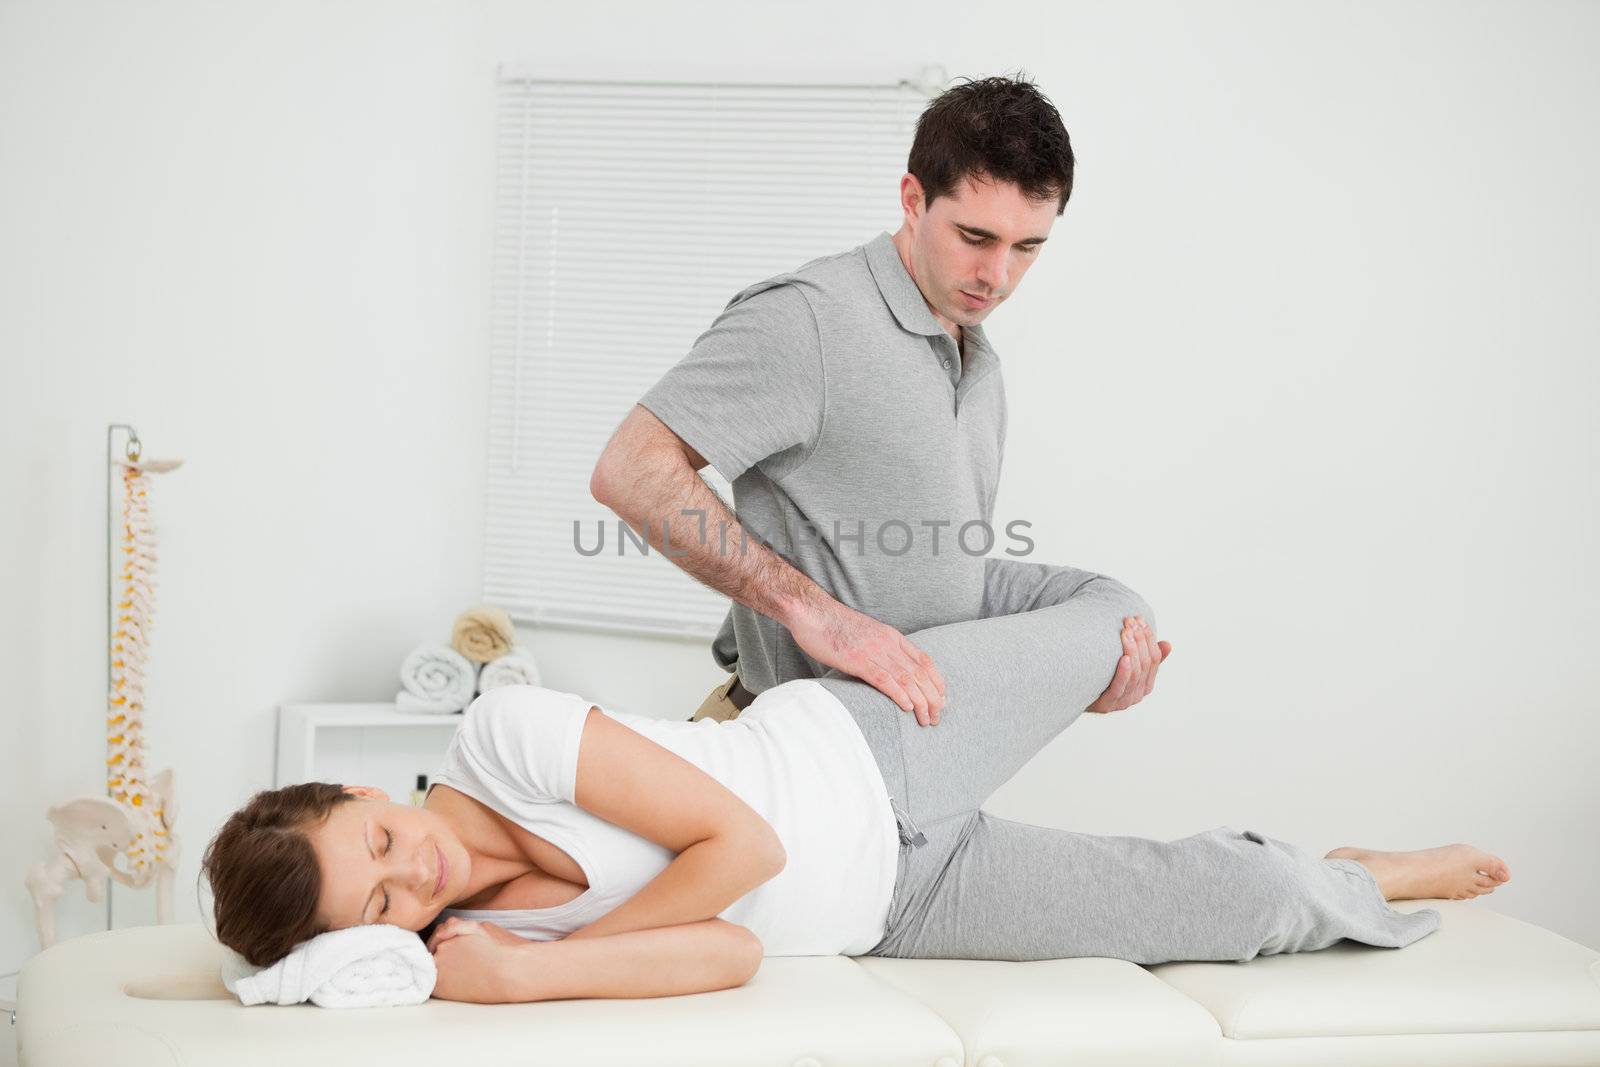 Leg of a woman being manipulated by a chiropractor by Wavebreakmedia